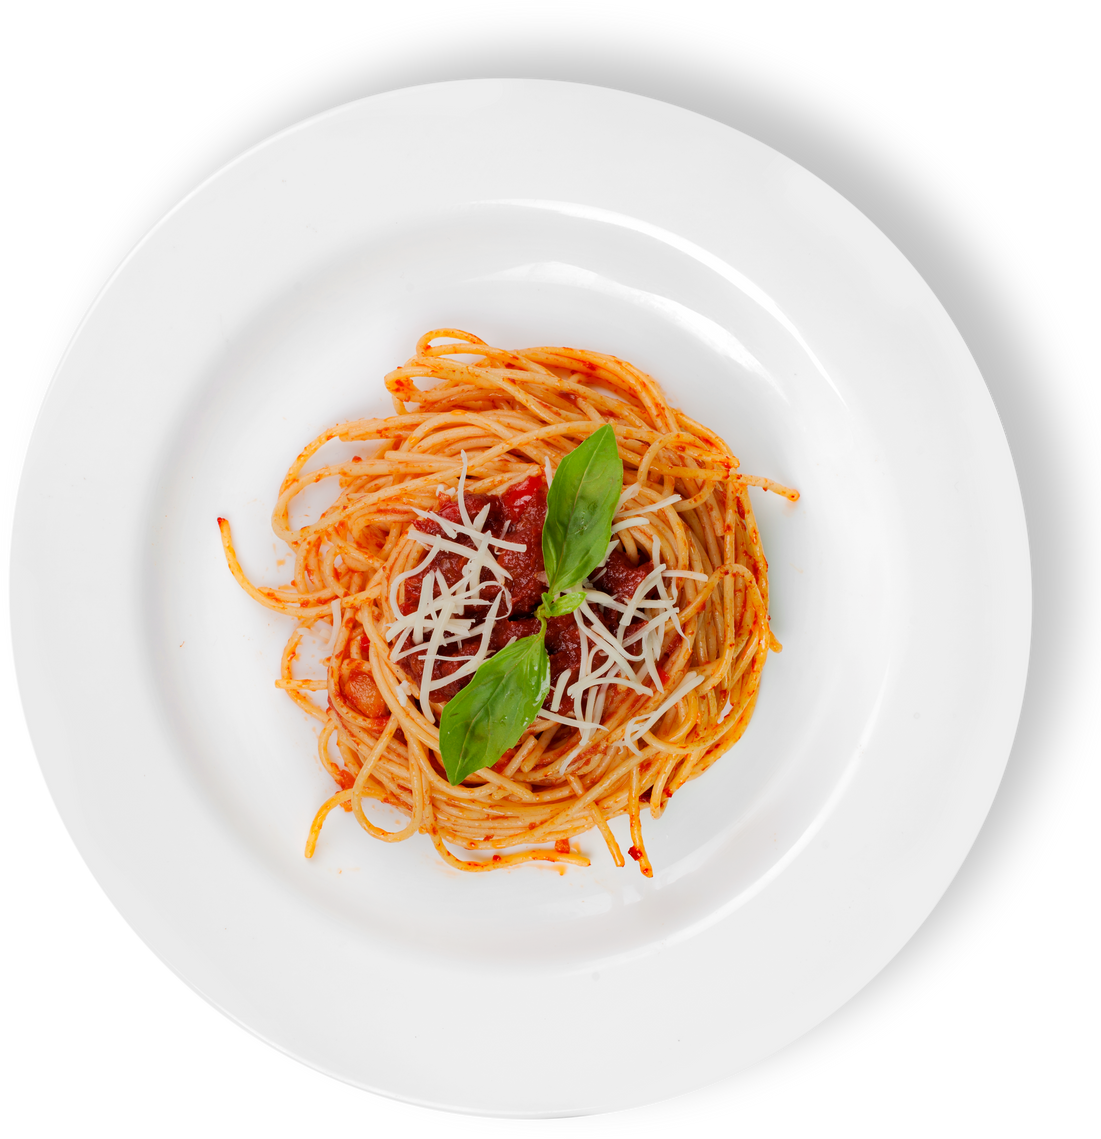 Spaghetti with Tomato Sauce and Sprinkled with Cheese